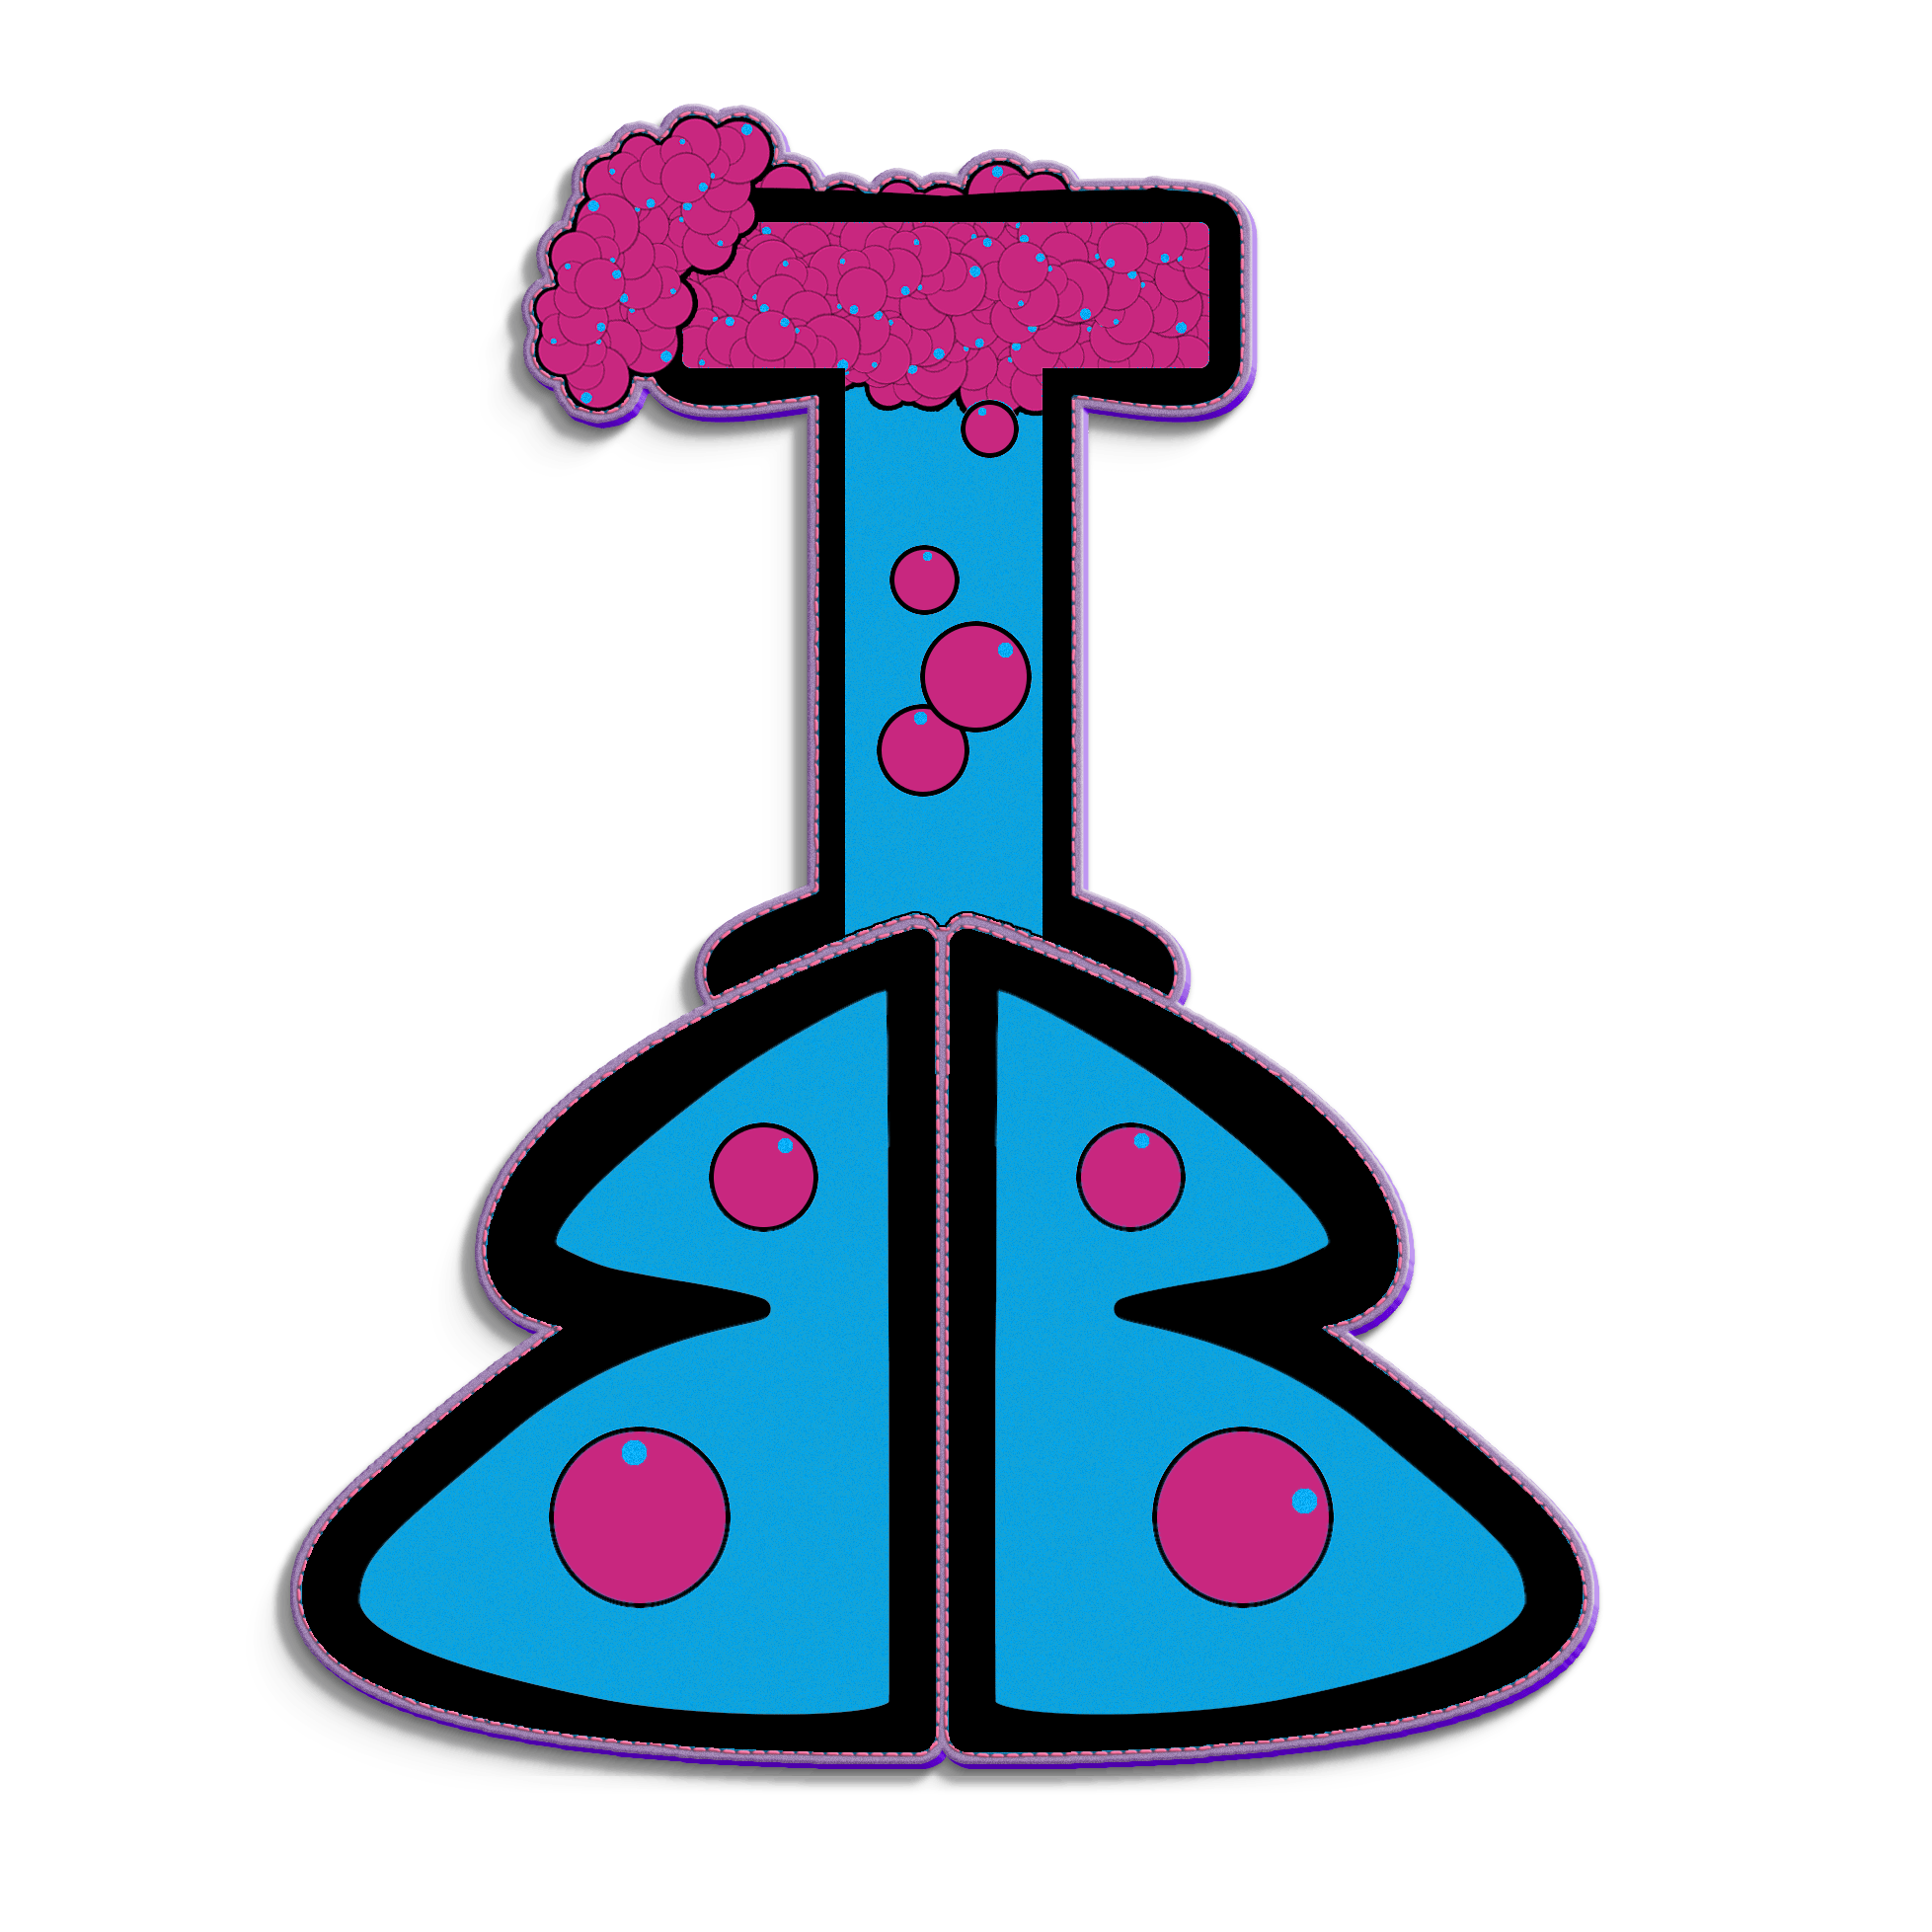 A stylized illustration of a laboratory flask in the shape of the letter 'i', with bubbles and a pink substance at the top, evoking thoughts of Roswell, New Mexico.